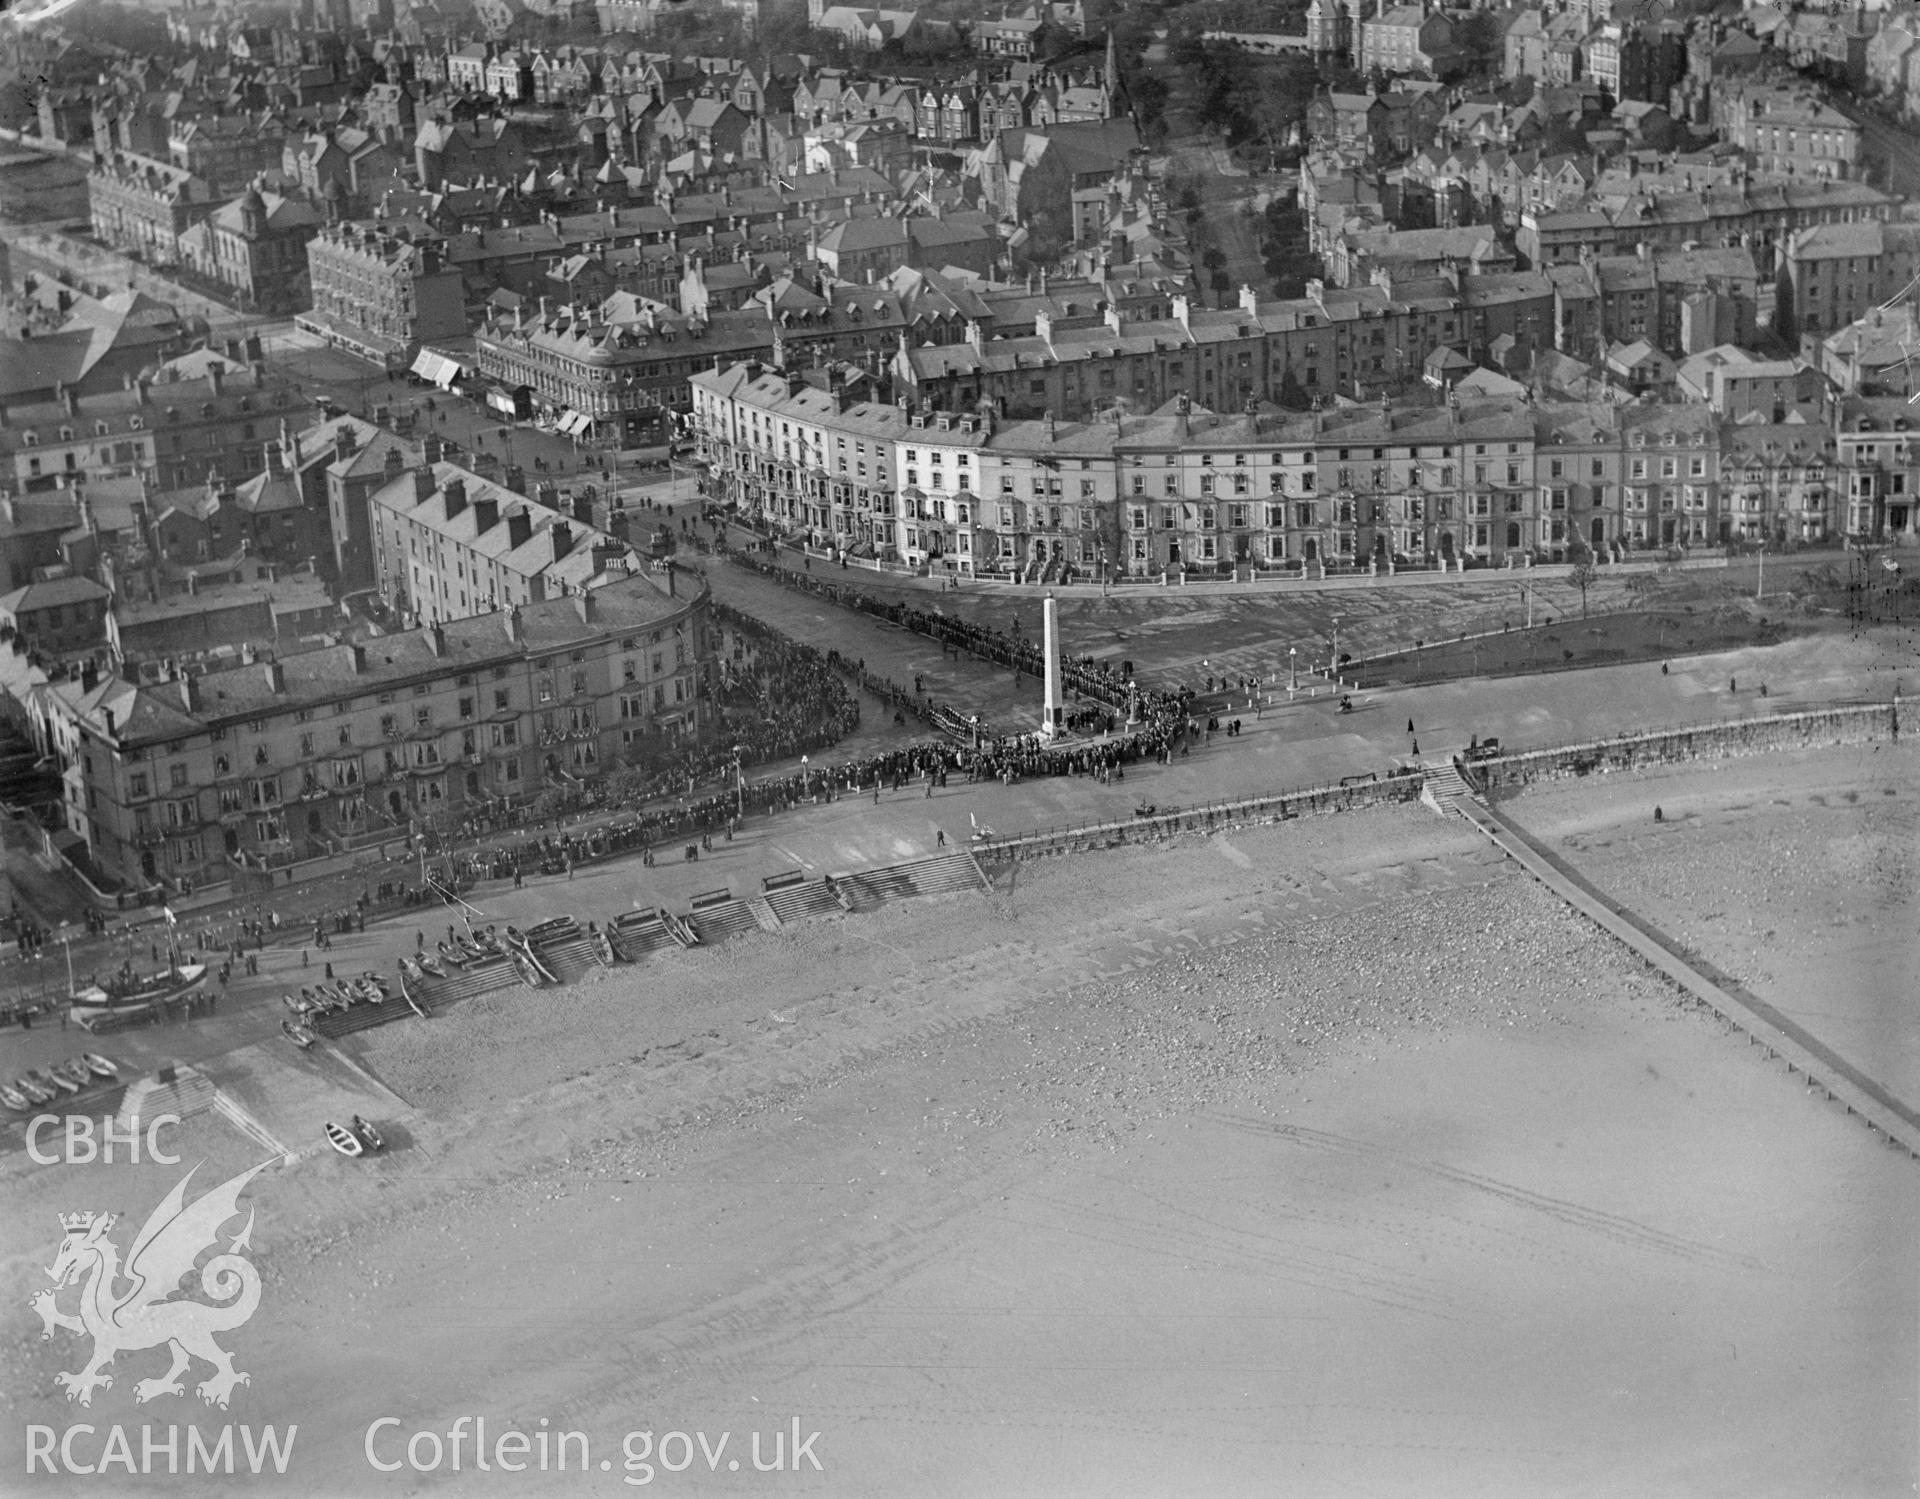 Llandudno, showing the Cenotaph war memorial during ceremony, oblique aerial view. 5?x4? black and white glass plate negative.